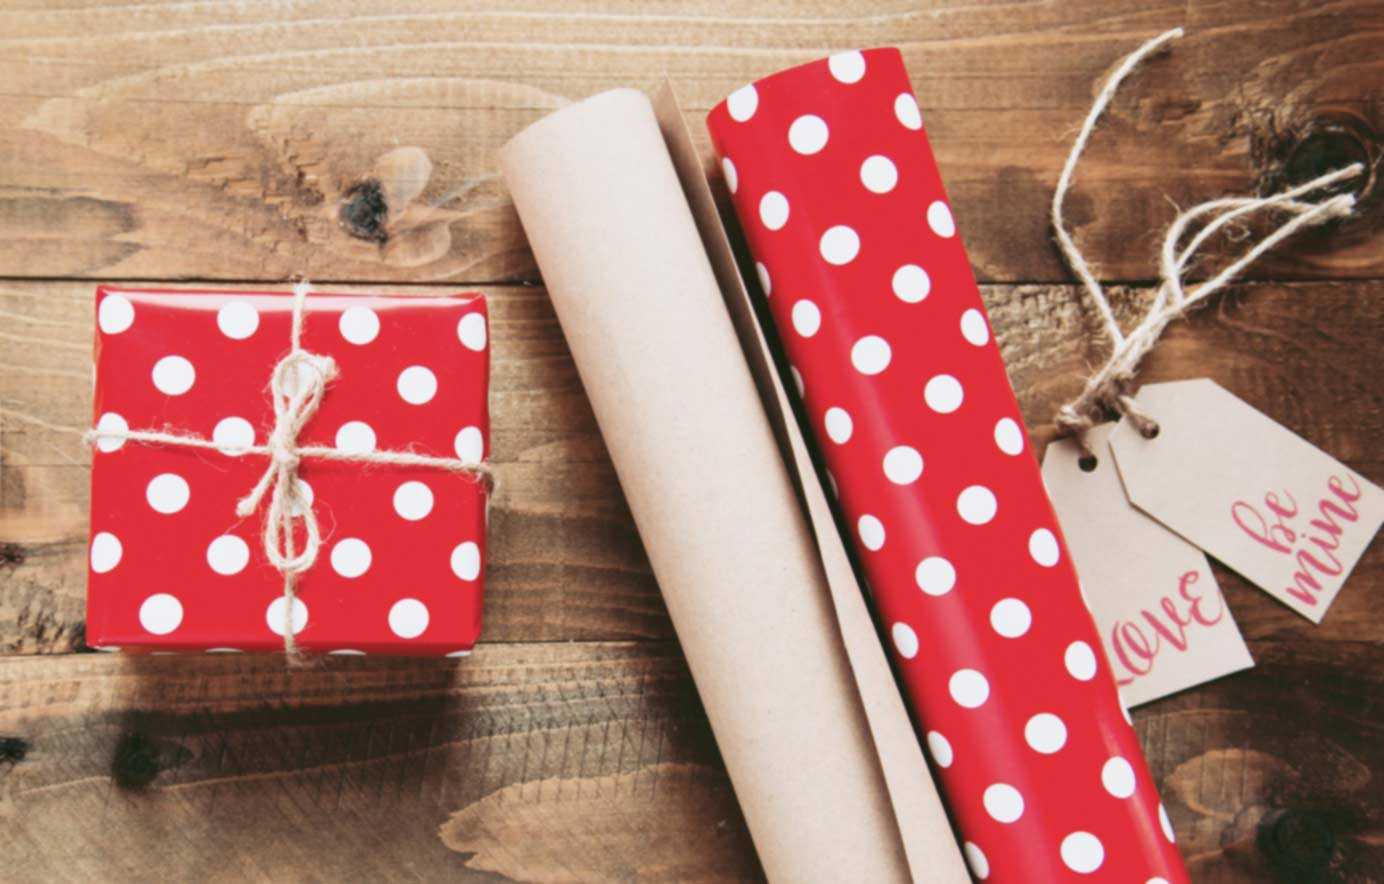 Wrapped Present Next to Red and White Polkadot Wrapping Paper